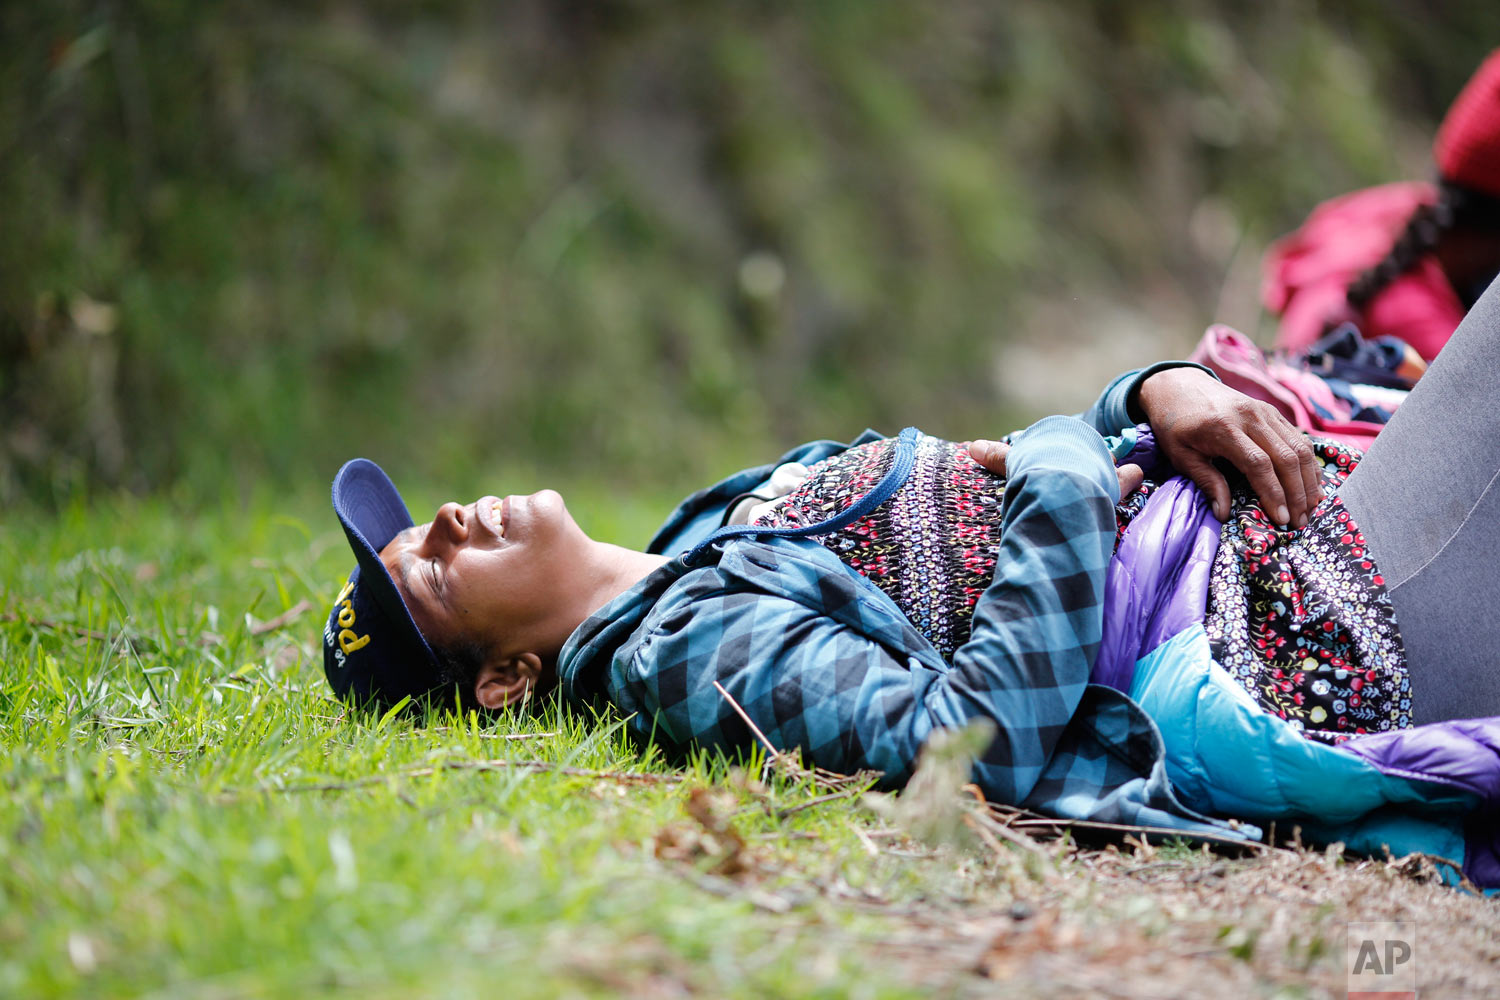  In this Sept 1, 2018 photo, fatigued Venezuelan Sandra Cadiz throws herself on the grass as she takes a break from walking to the Berlin paramo leading to the city of Bucaramanga, Colombia, on her journey to Peru. Like a growing number of desperate 